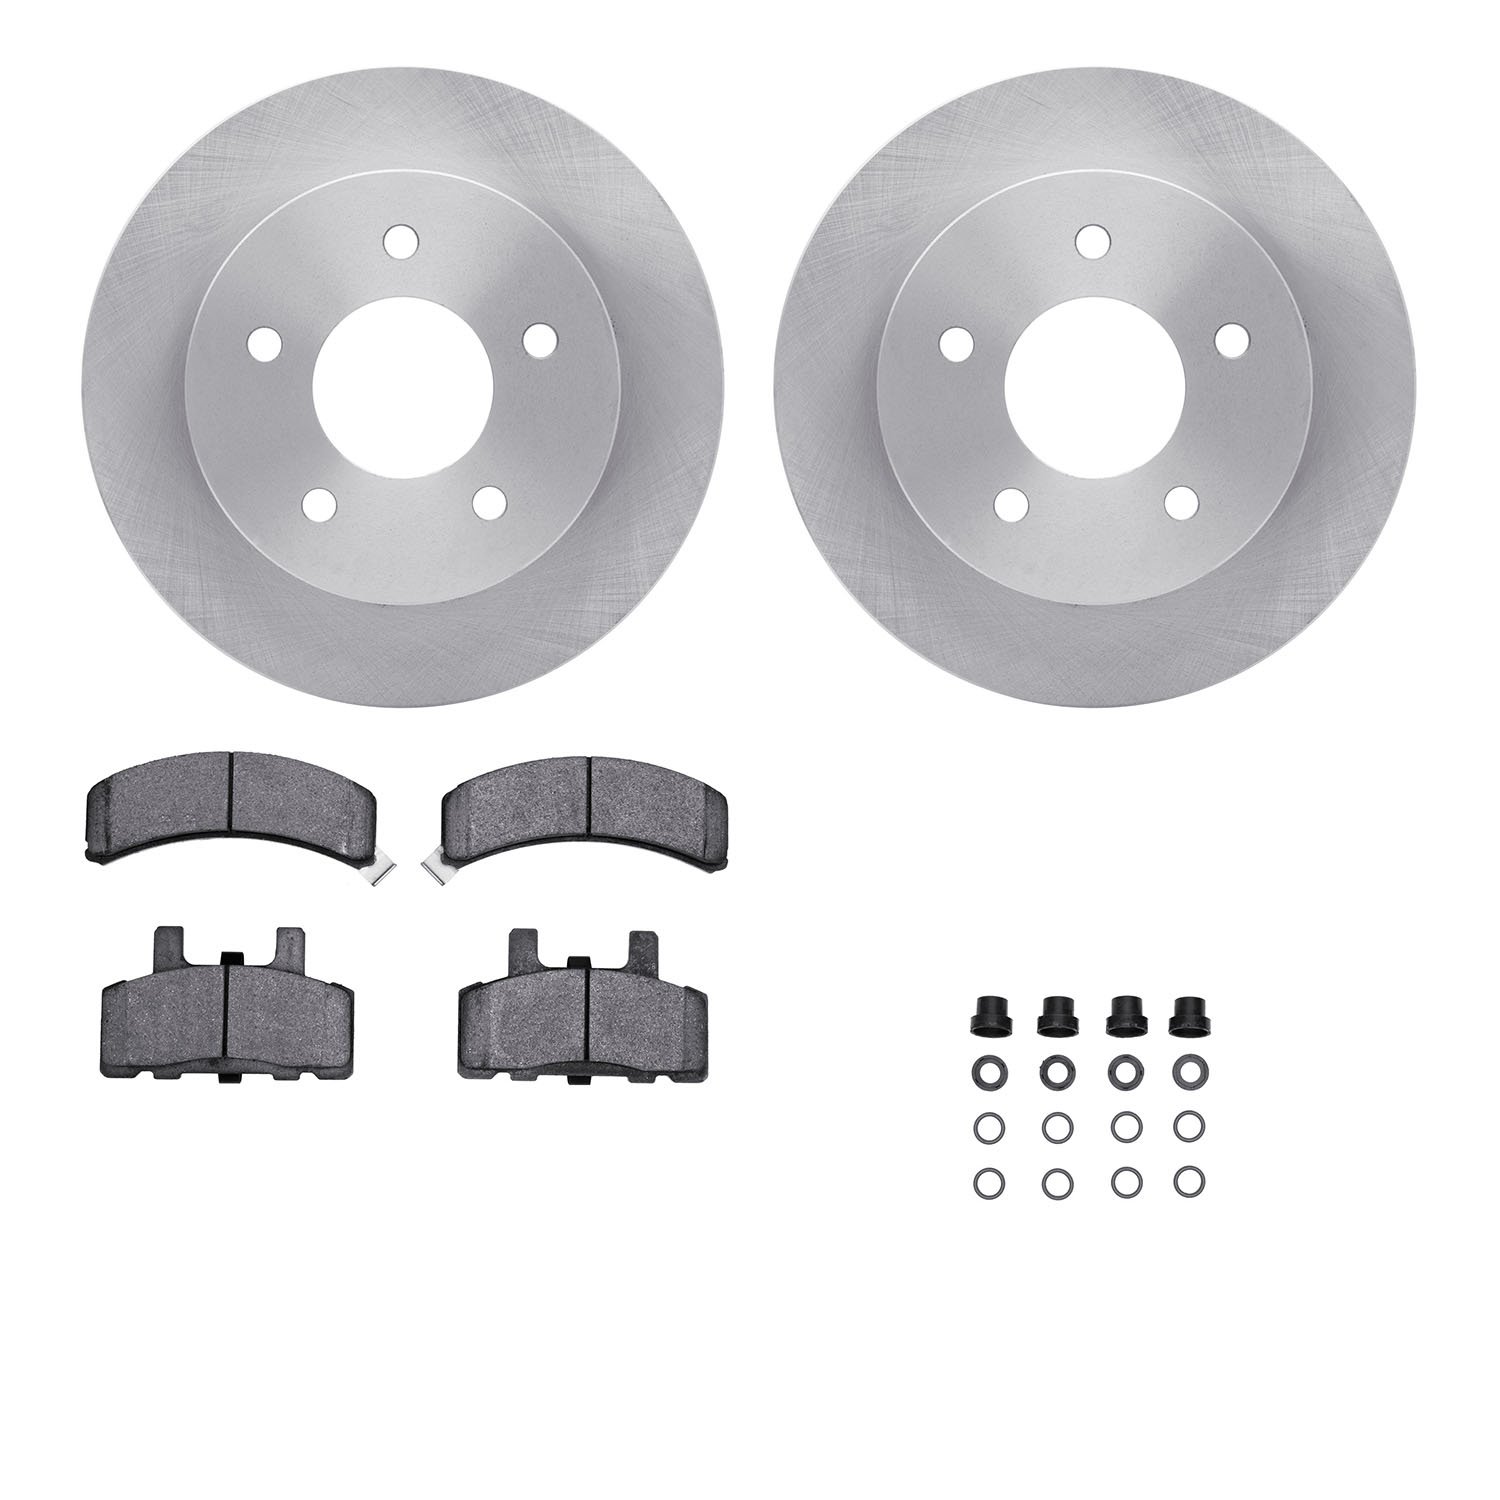 6412-48031 Brake Rotors with Ultimate-Duty Brake Pads Kit & Hardware, 1990-2002 GM, Position: Front